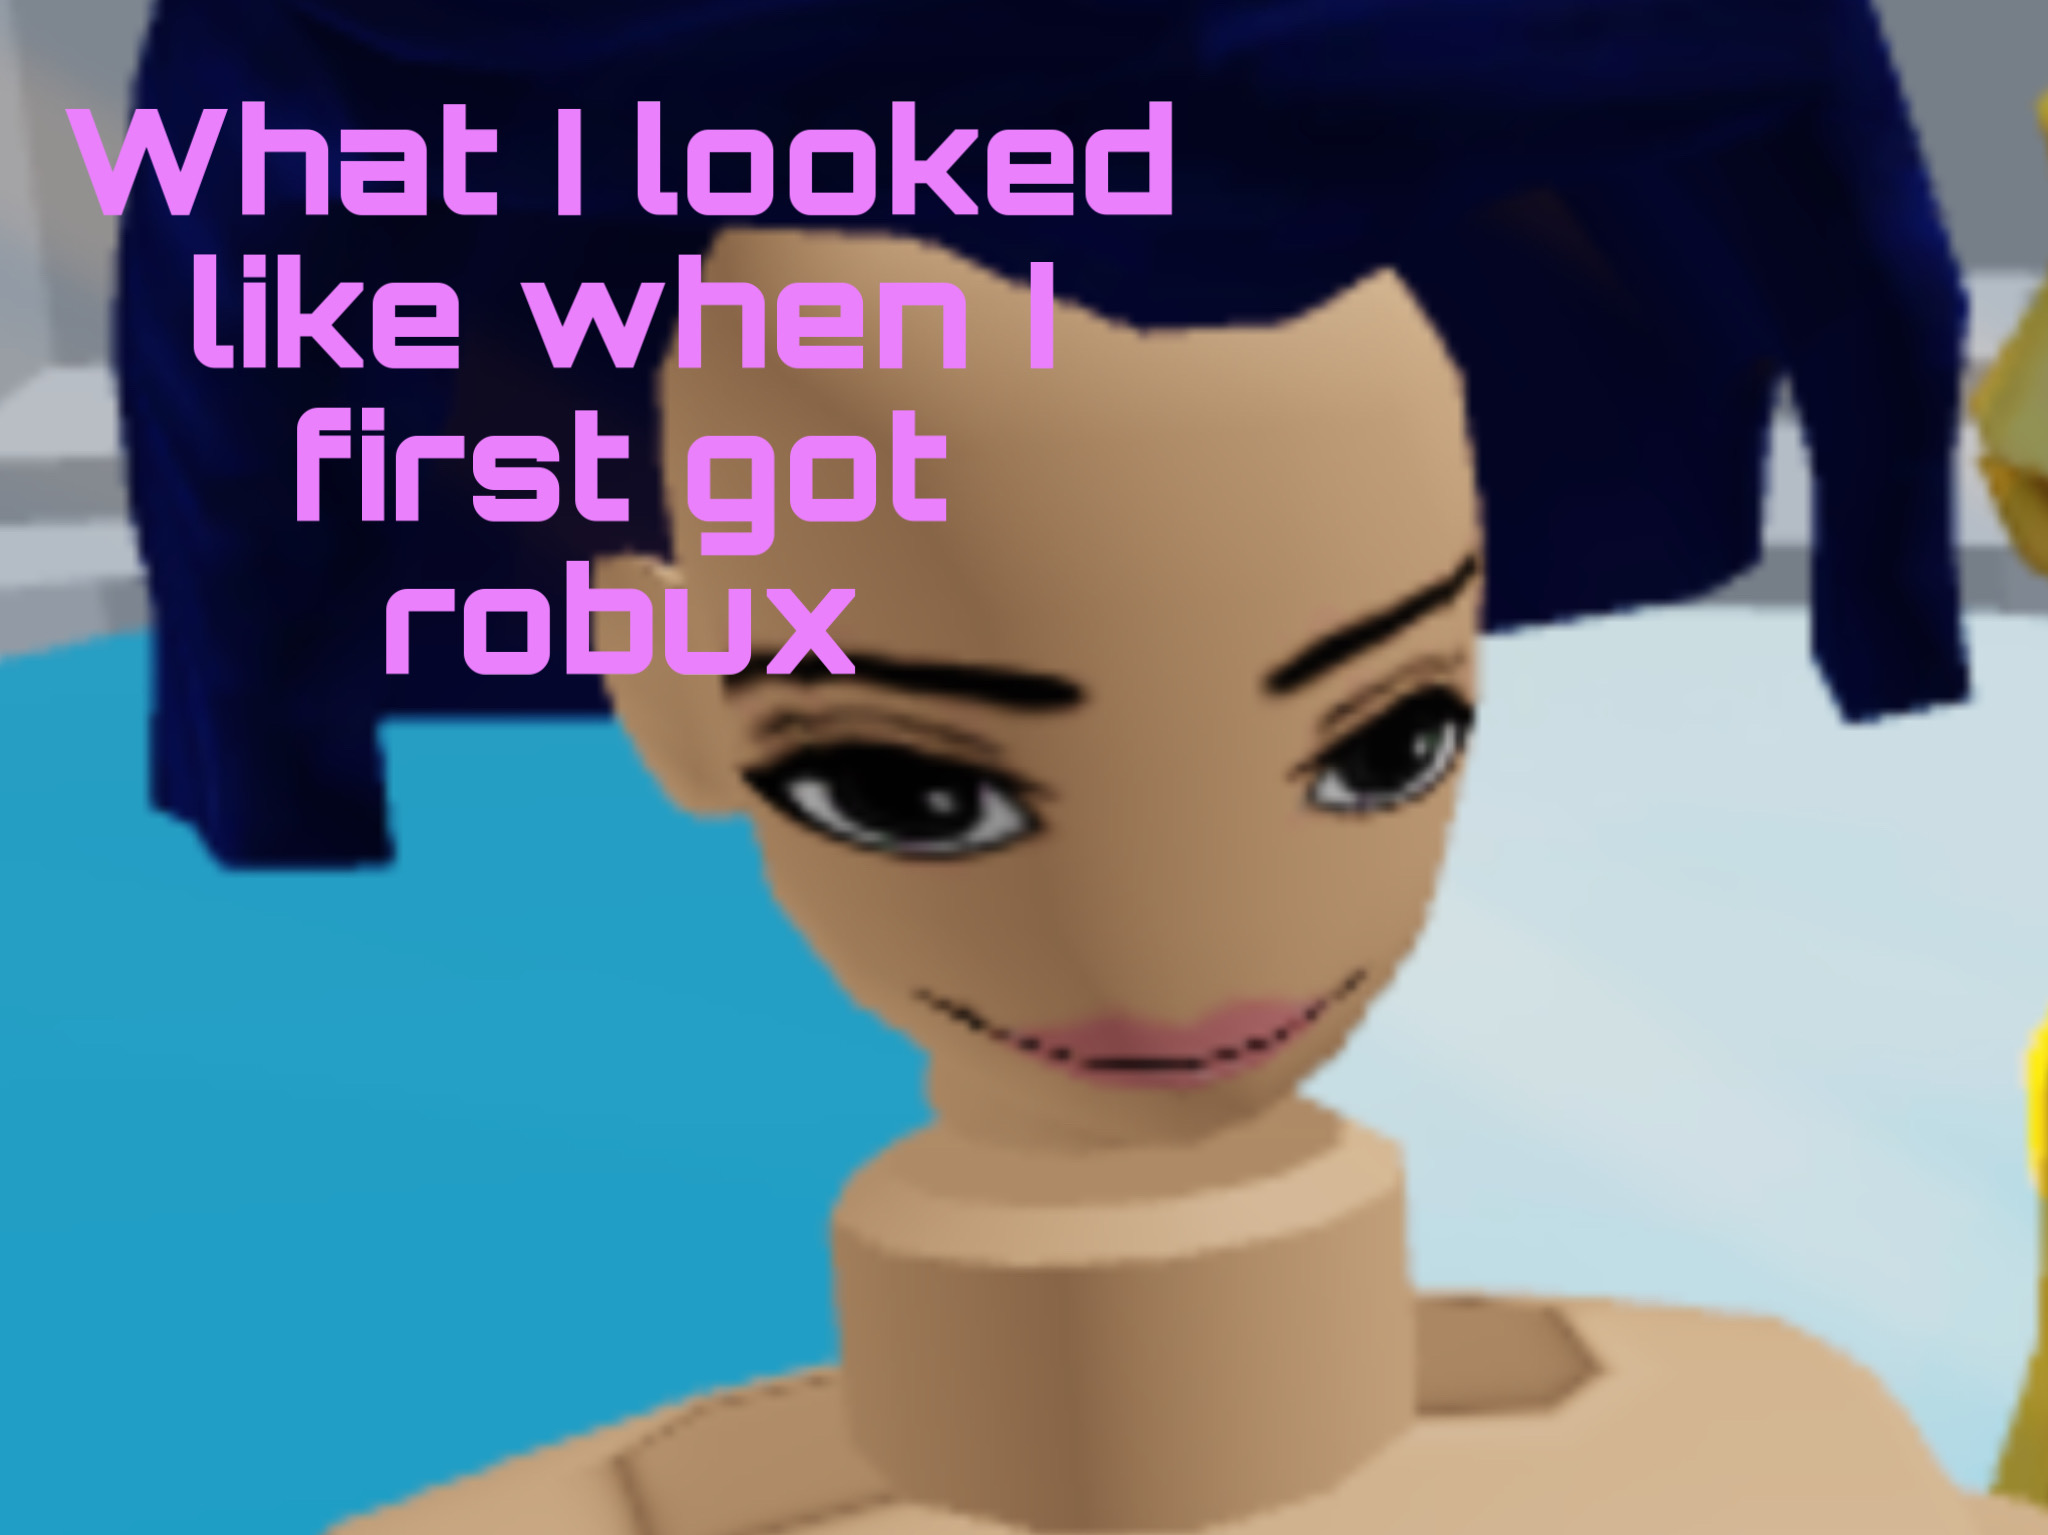 Image By 𝑙𝑎𝑟𝑣𝑎𝑟𝑐𝑎𝑘𝑒 - roblox trollers 2020